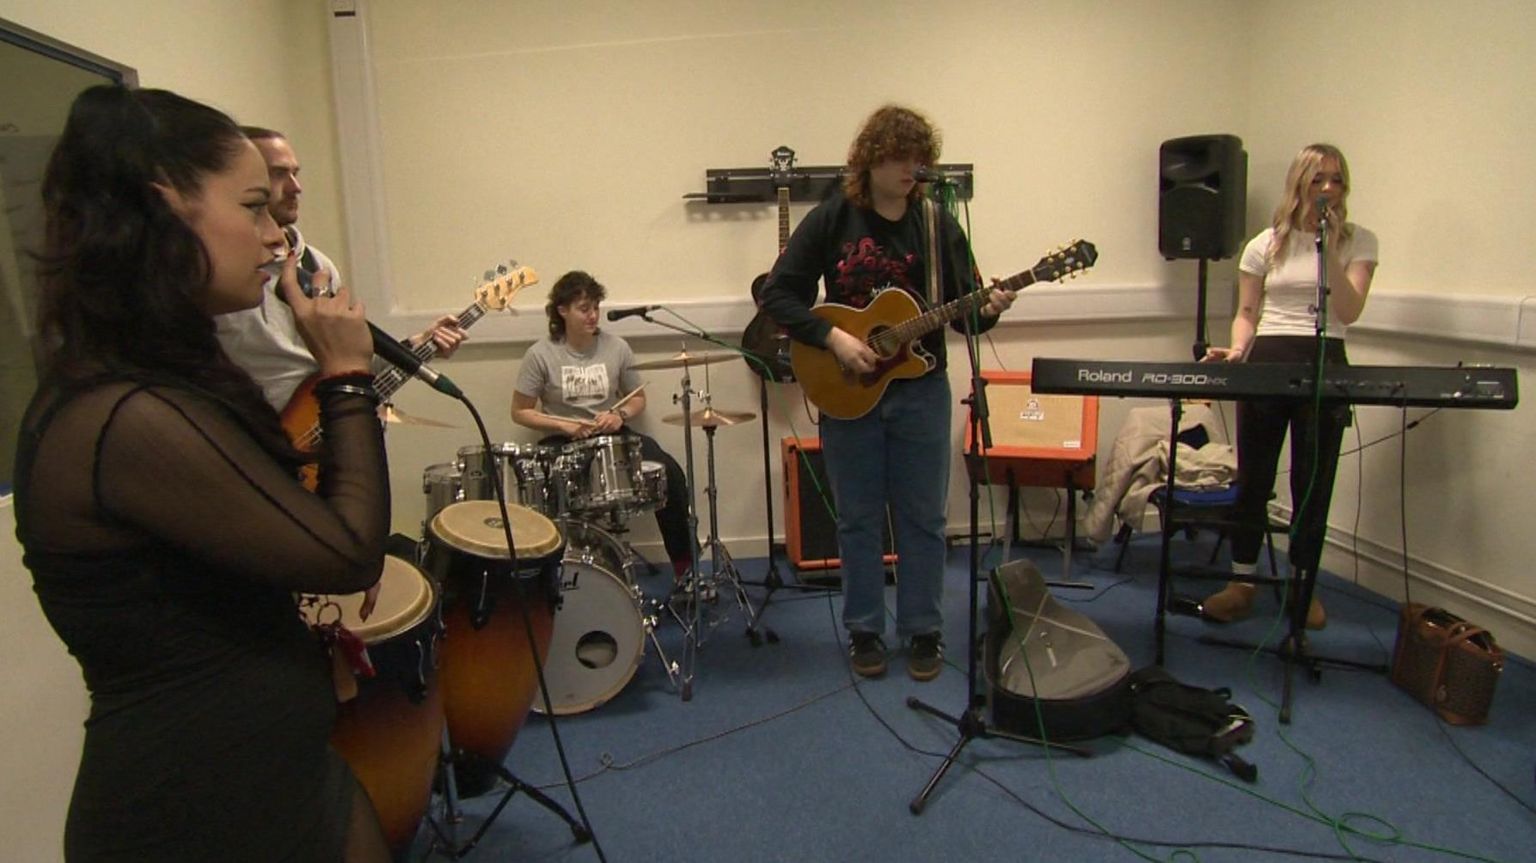 Students practising in a music studio at LIPA Sixth Form College